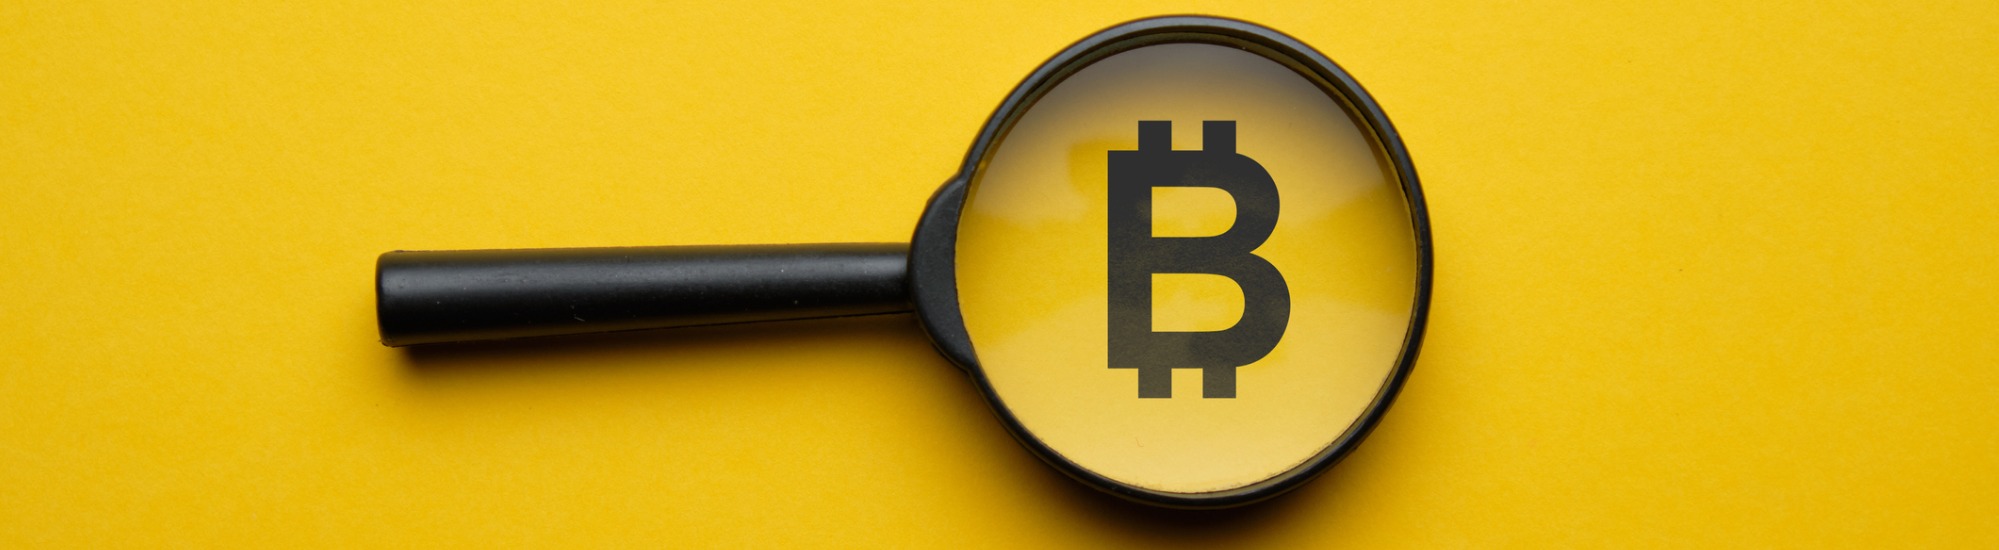 A magnifying glass over the Bitcoin symbol